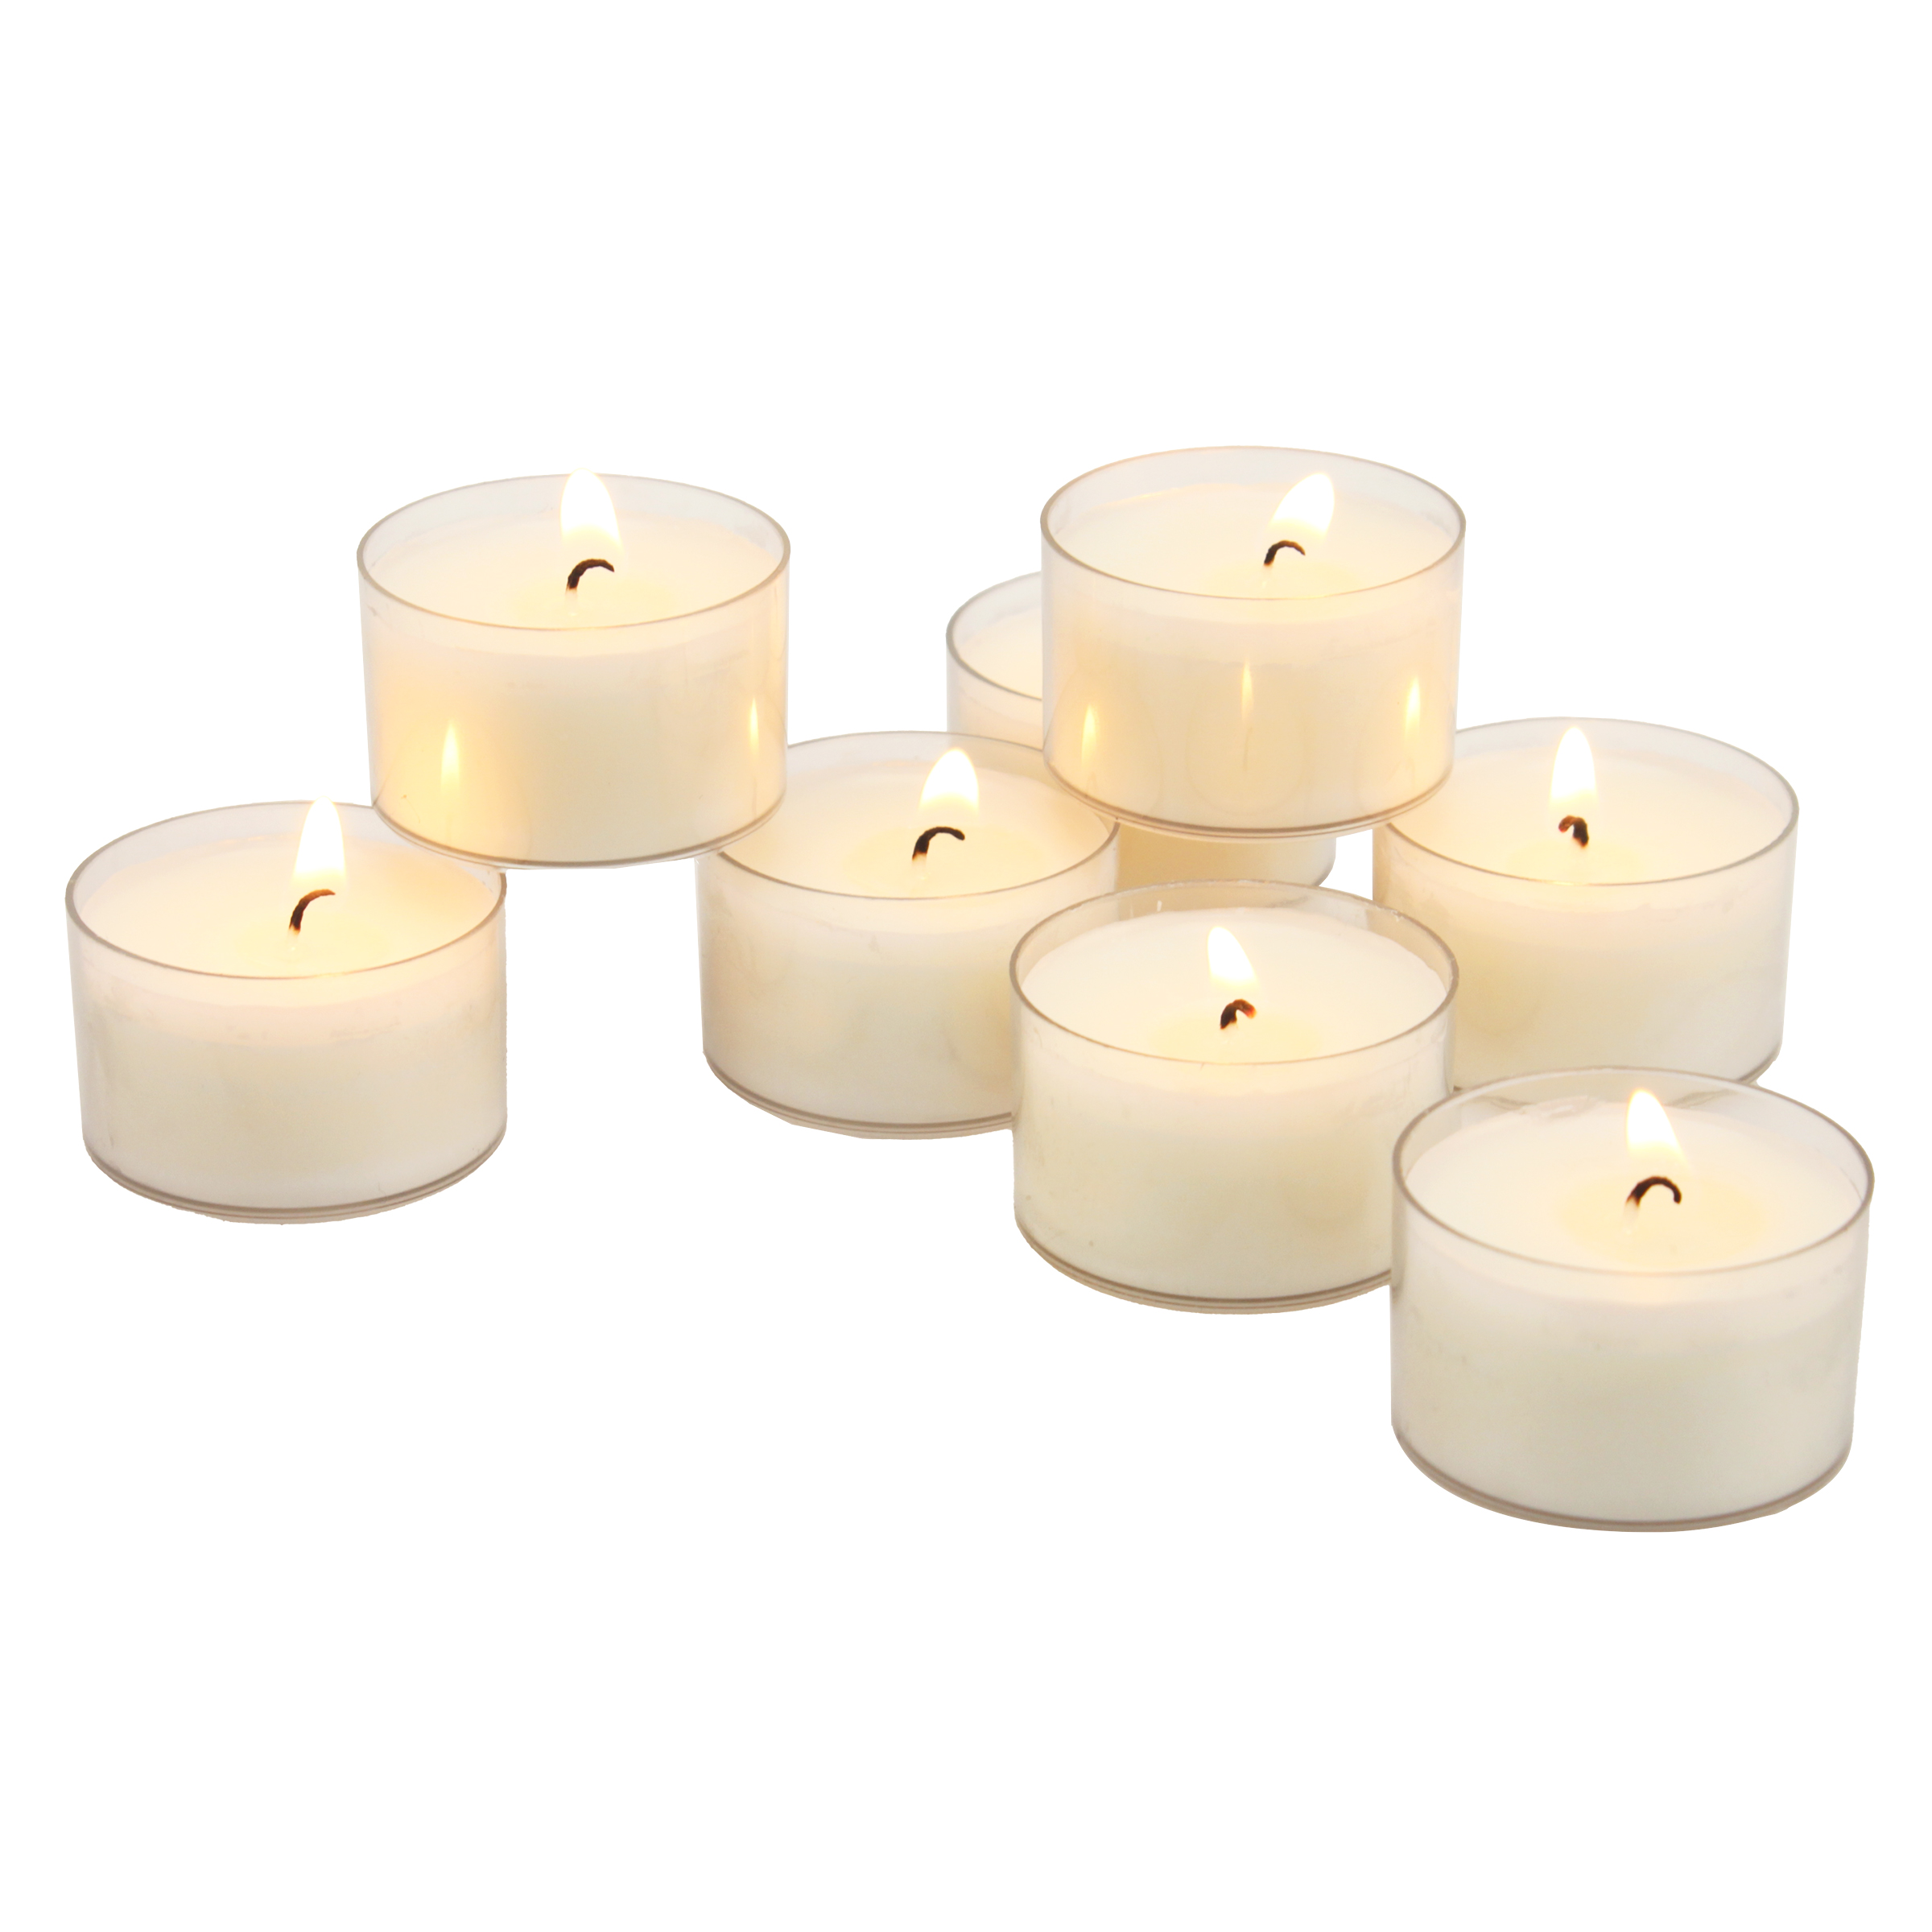 Stonebriar Unscented Long Burning Clear Cup Tealight Candles with 6-7 Hour Burn Time, 96 Pack, White - image 1 of 8